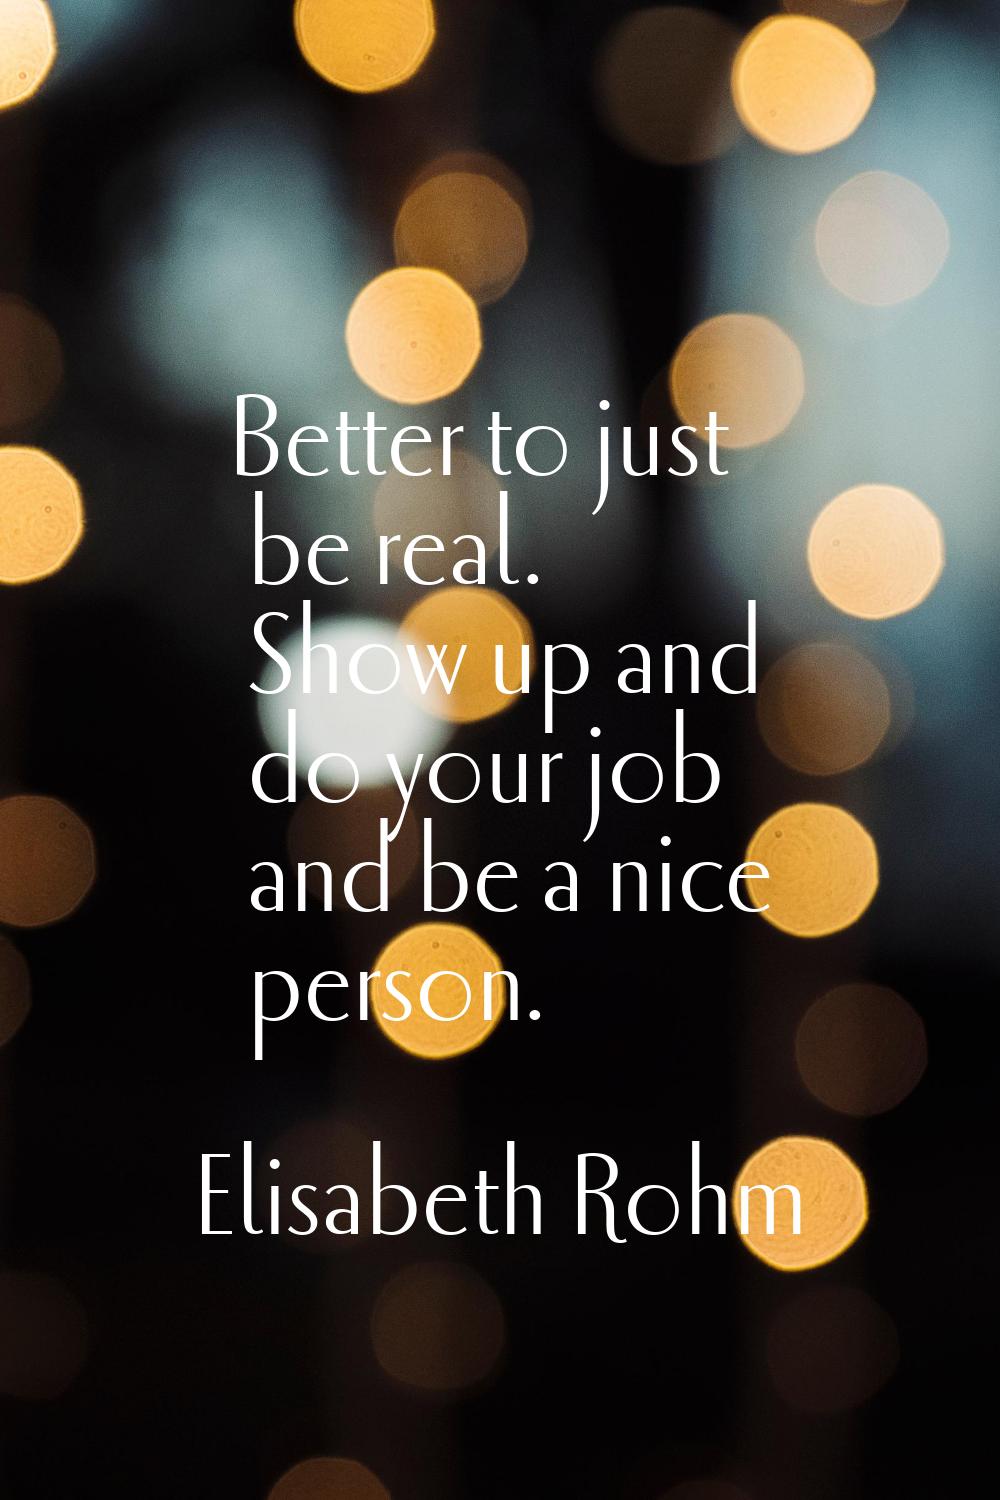 Better to just be real. Show up and do your job and be a nice person.